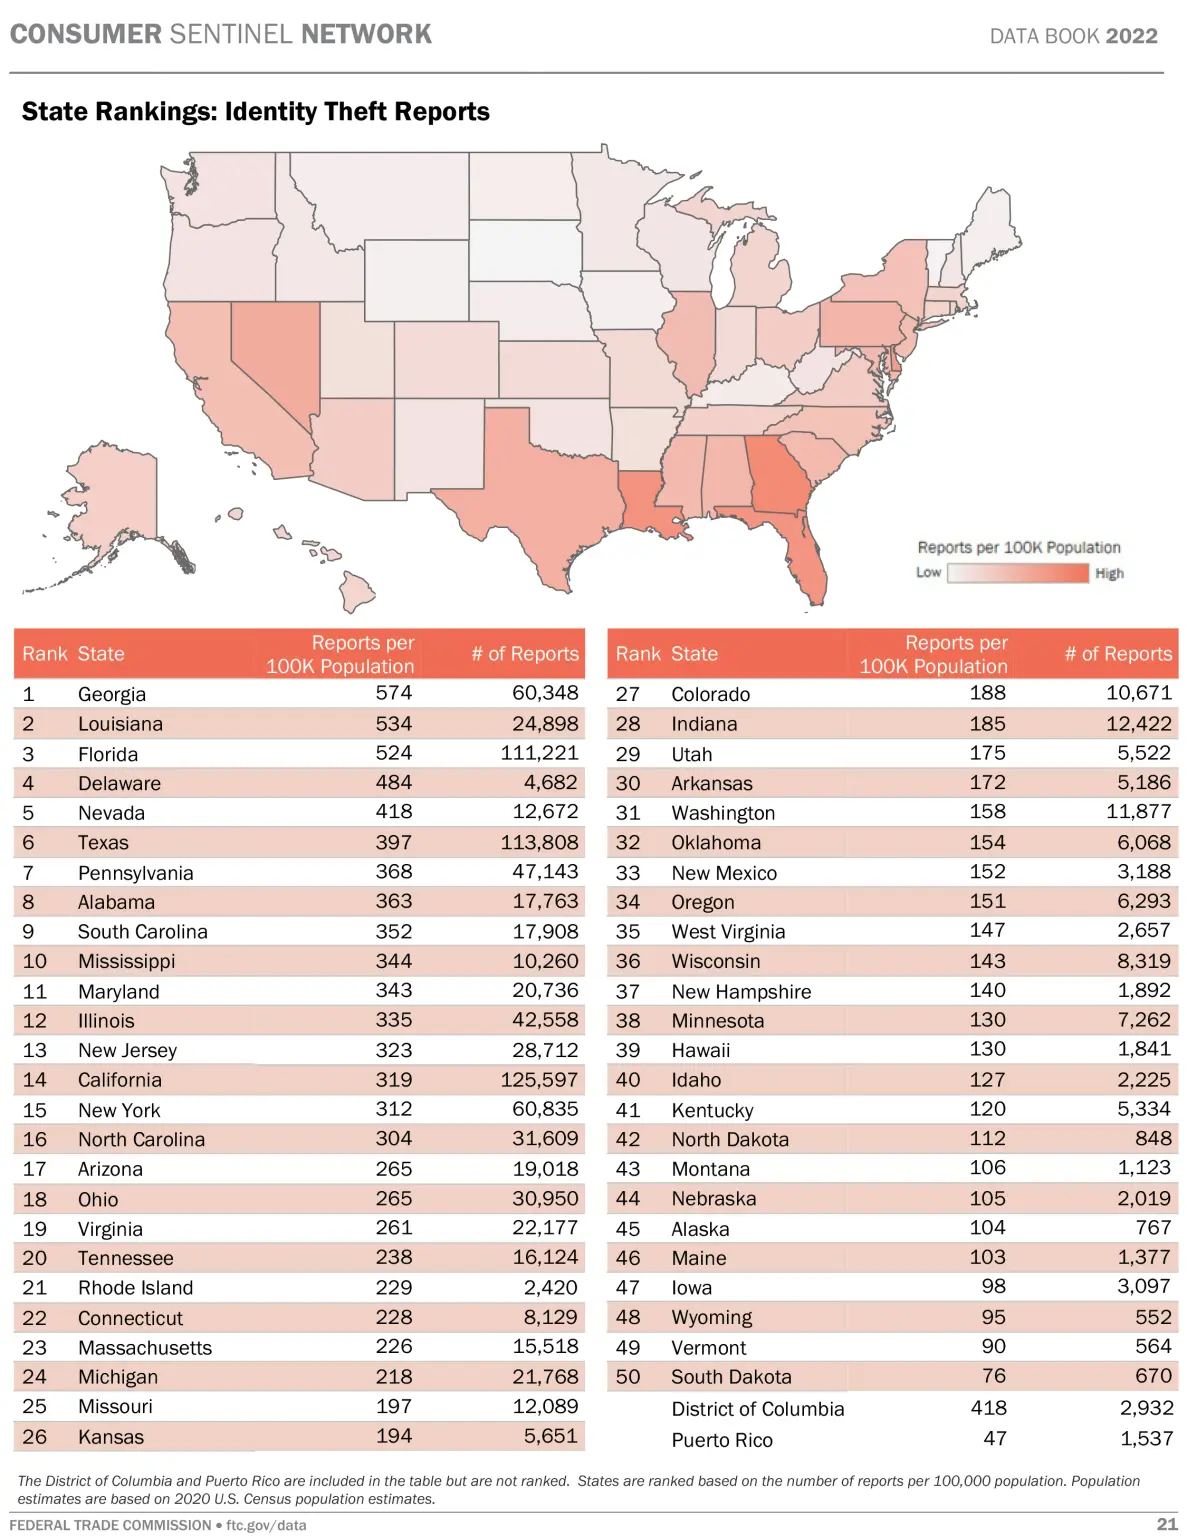 Top US States with the Highest Risk of Identity Theft